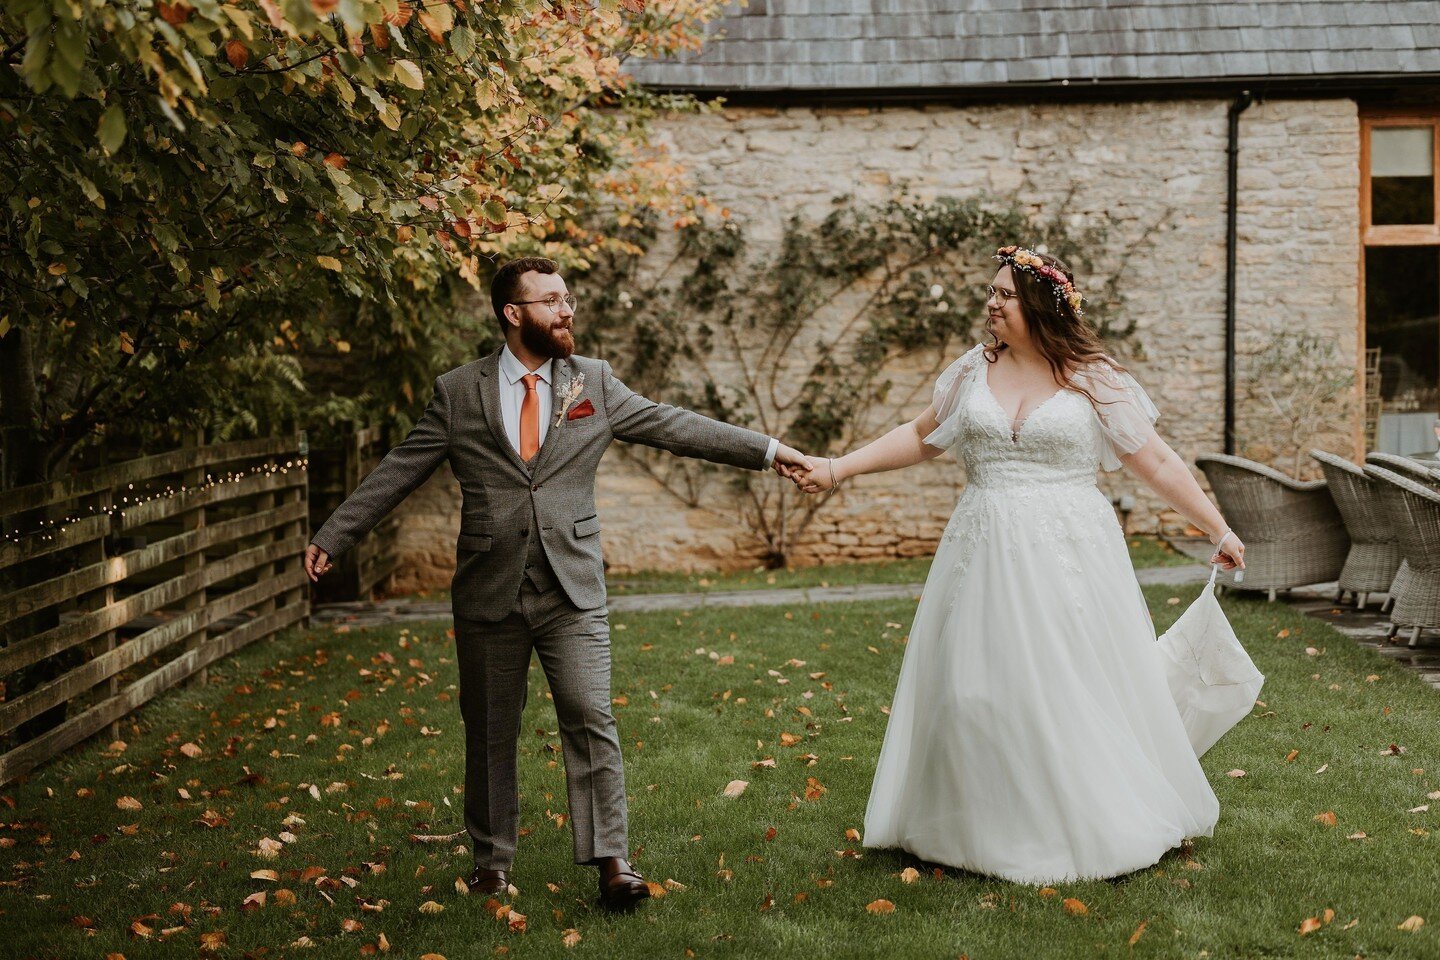 Enjoying the beauty of the outdoors here at Wick Farm Bath 💚

Set in 37 acres of stunning Somerset countryside, our venue is a pituresque spot for your special day. You only have to look at a couple of pictures to see that it's beautiful all year ro